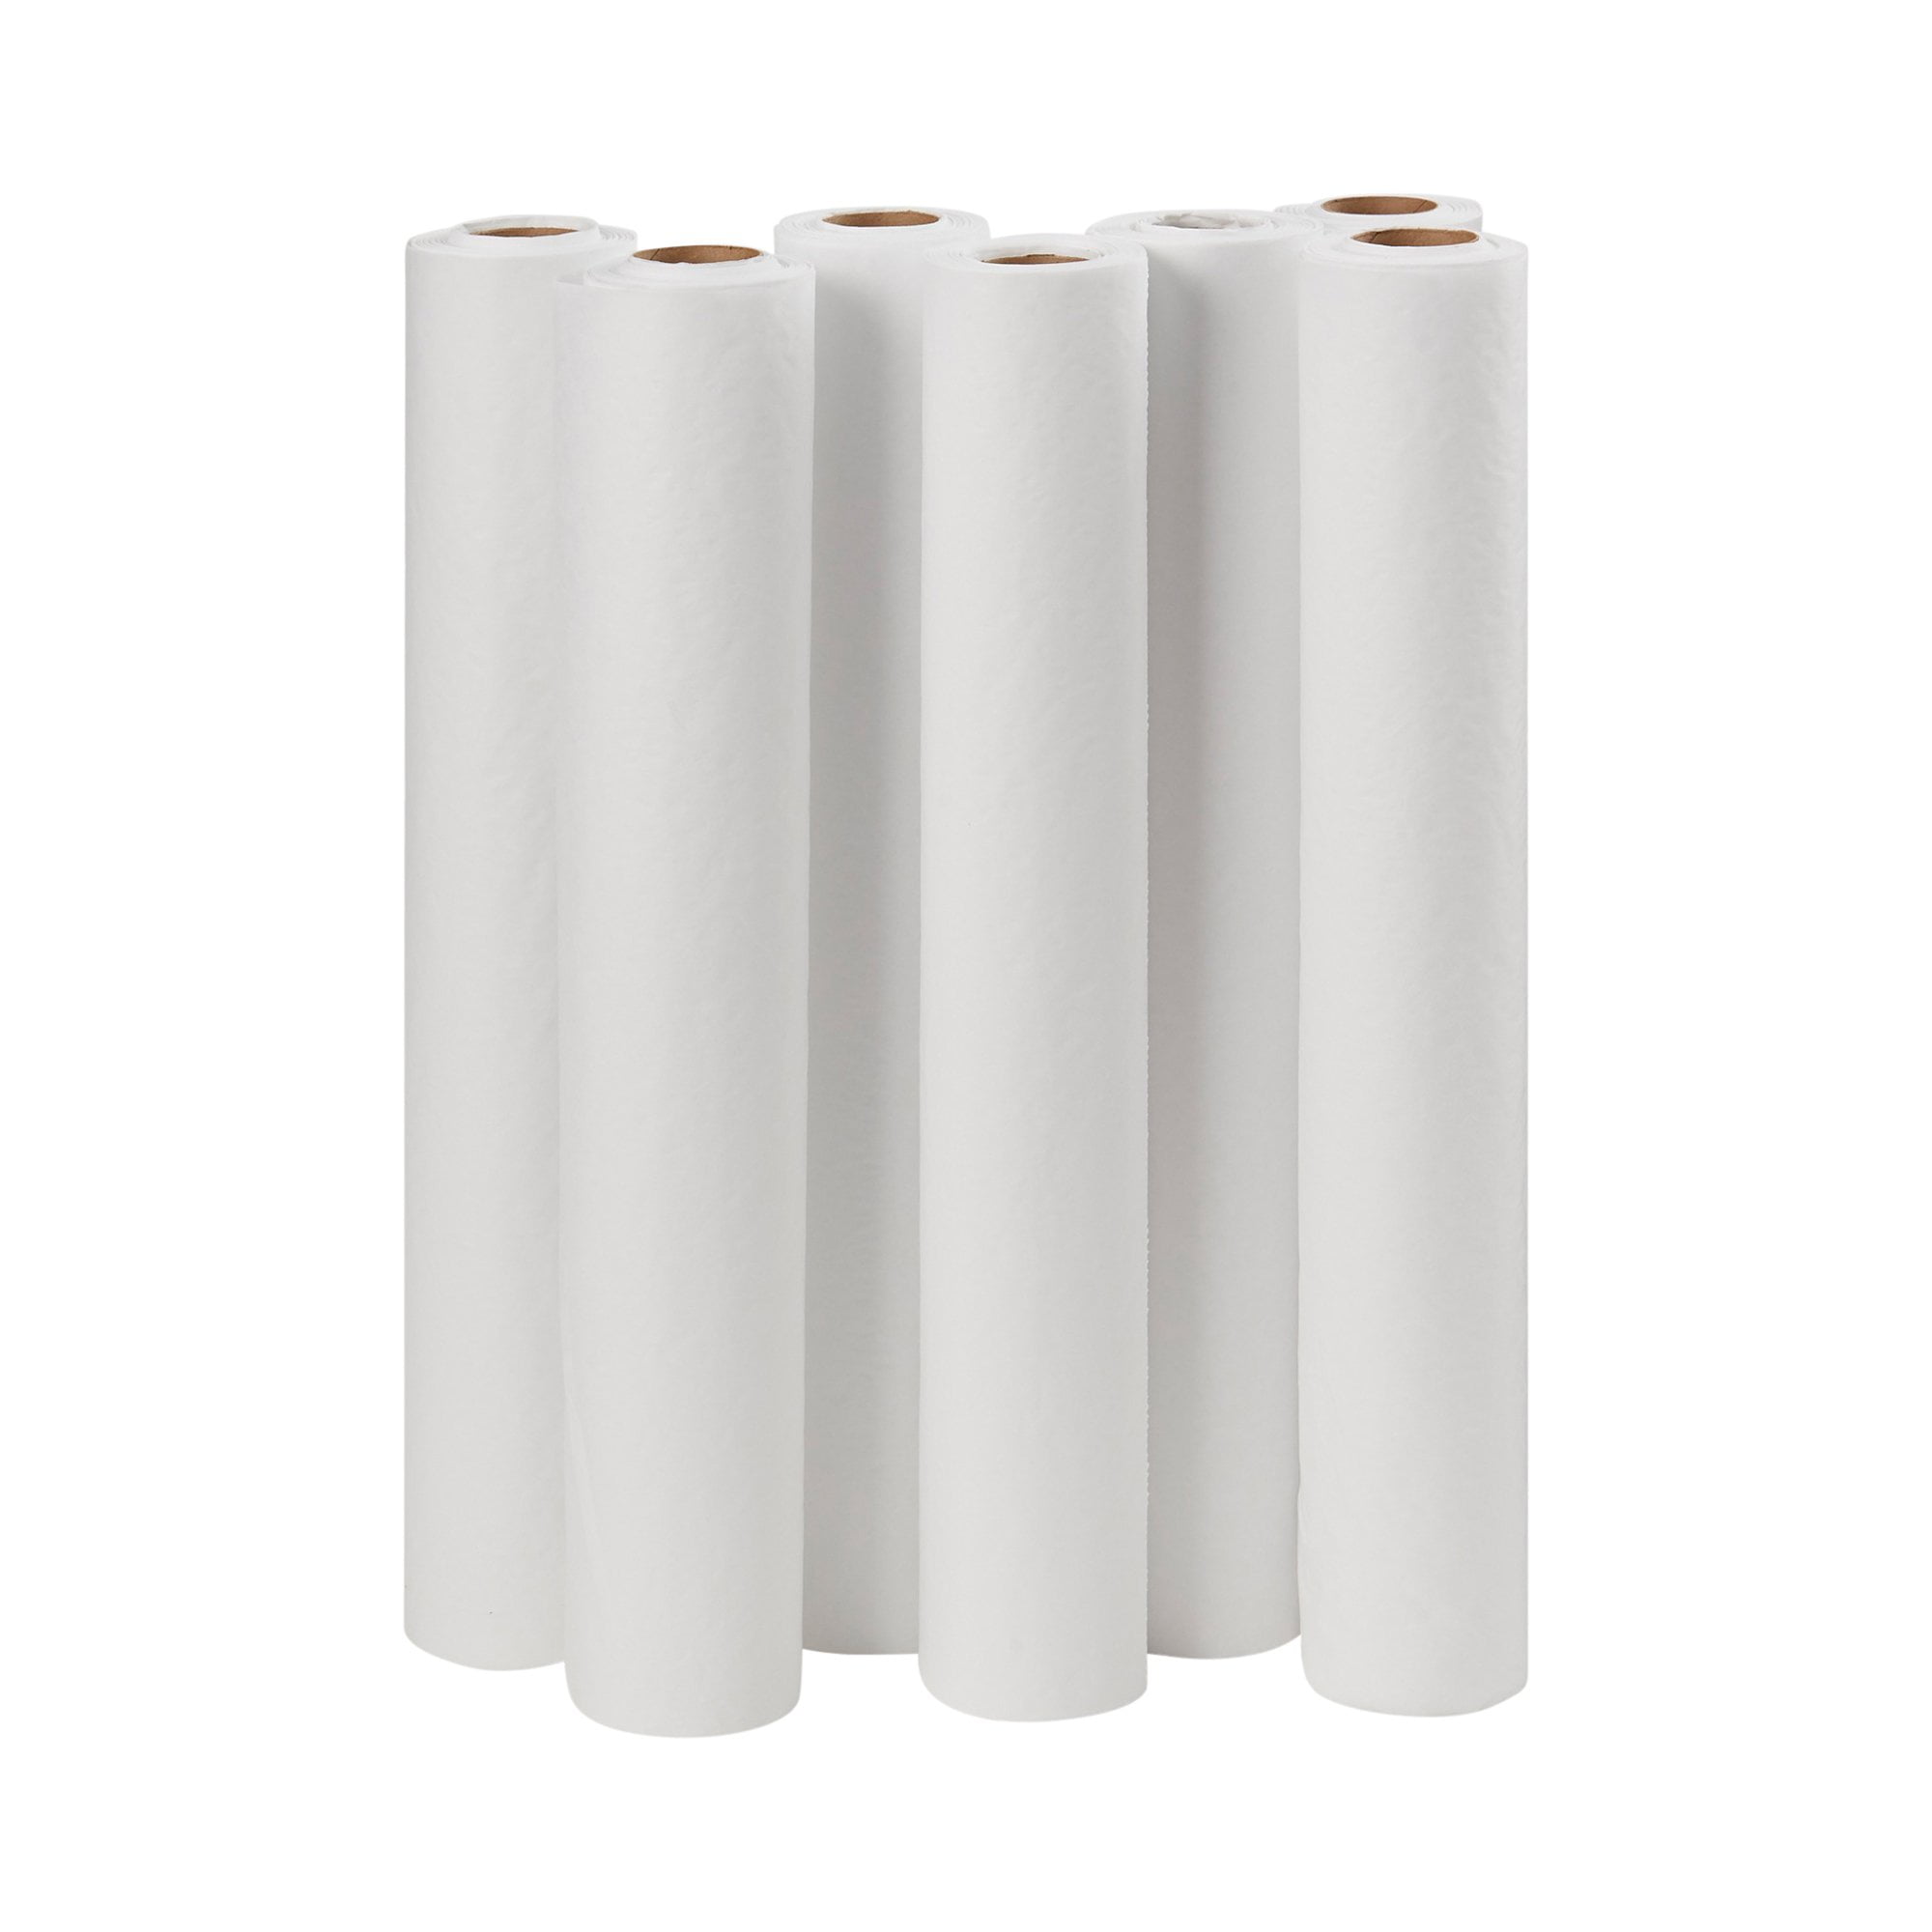 MB1252, Exam Table Paper Rolls